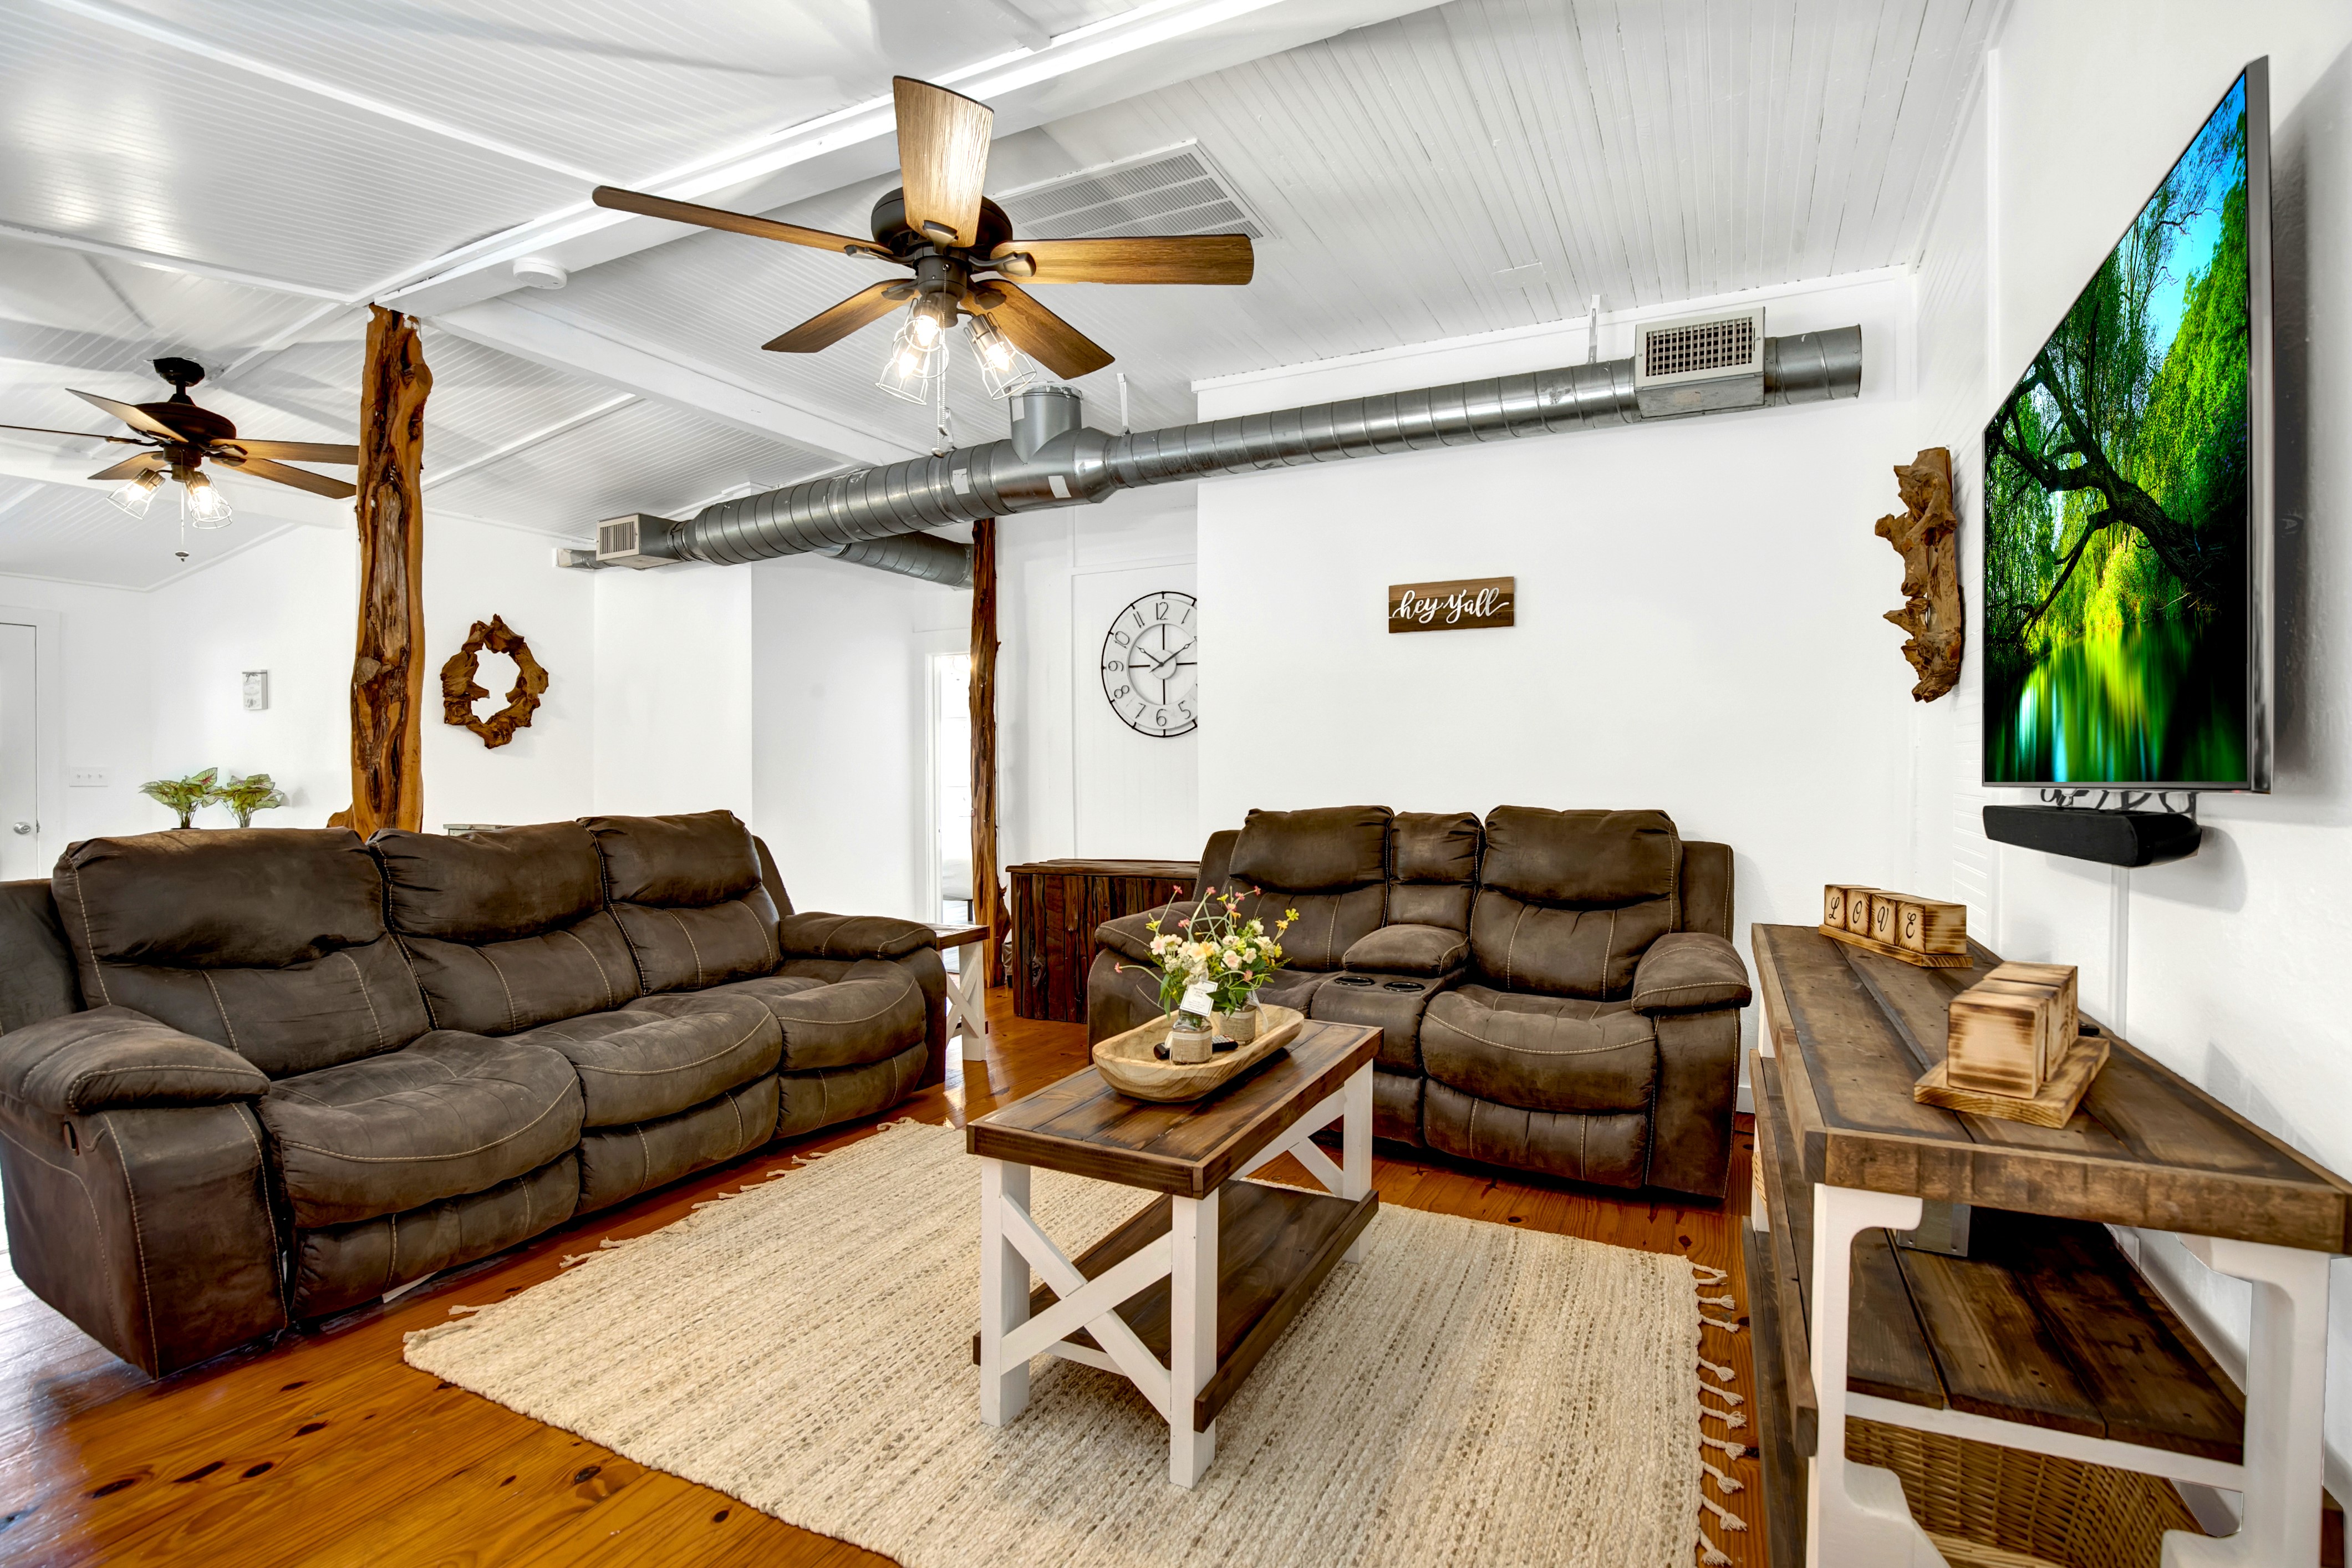 The main living room is spacious and comfortable with plenty of seating for everyone.